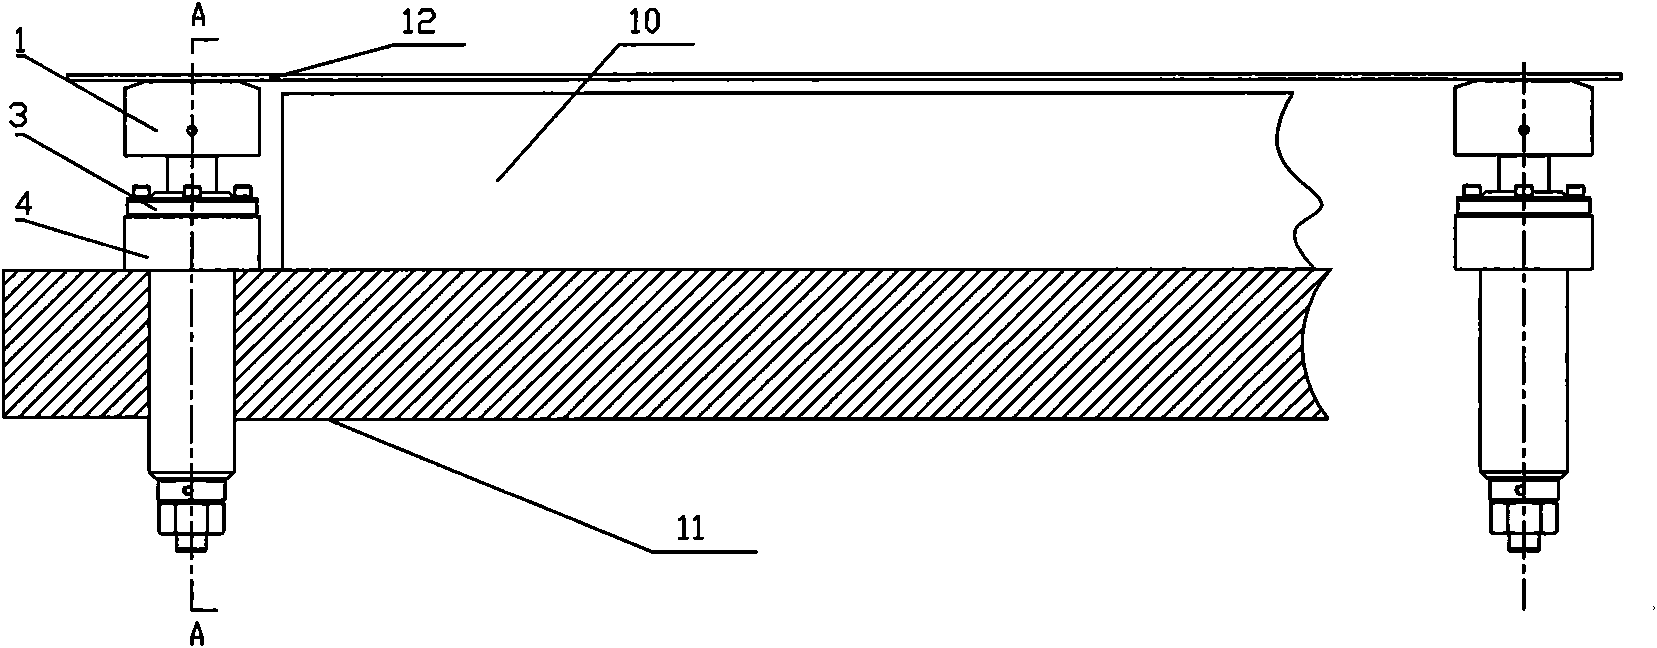 Floating plate supporting device